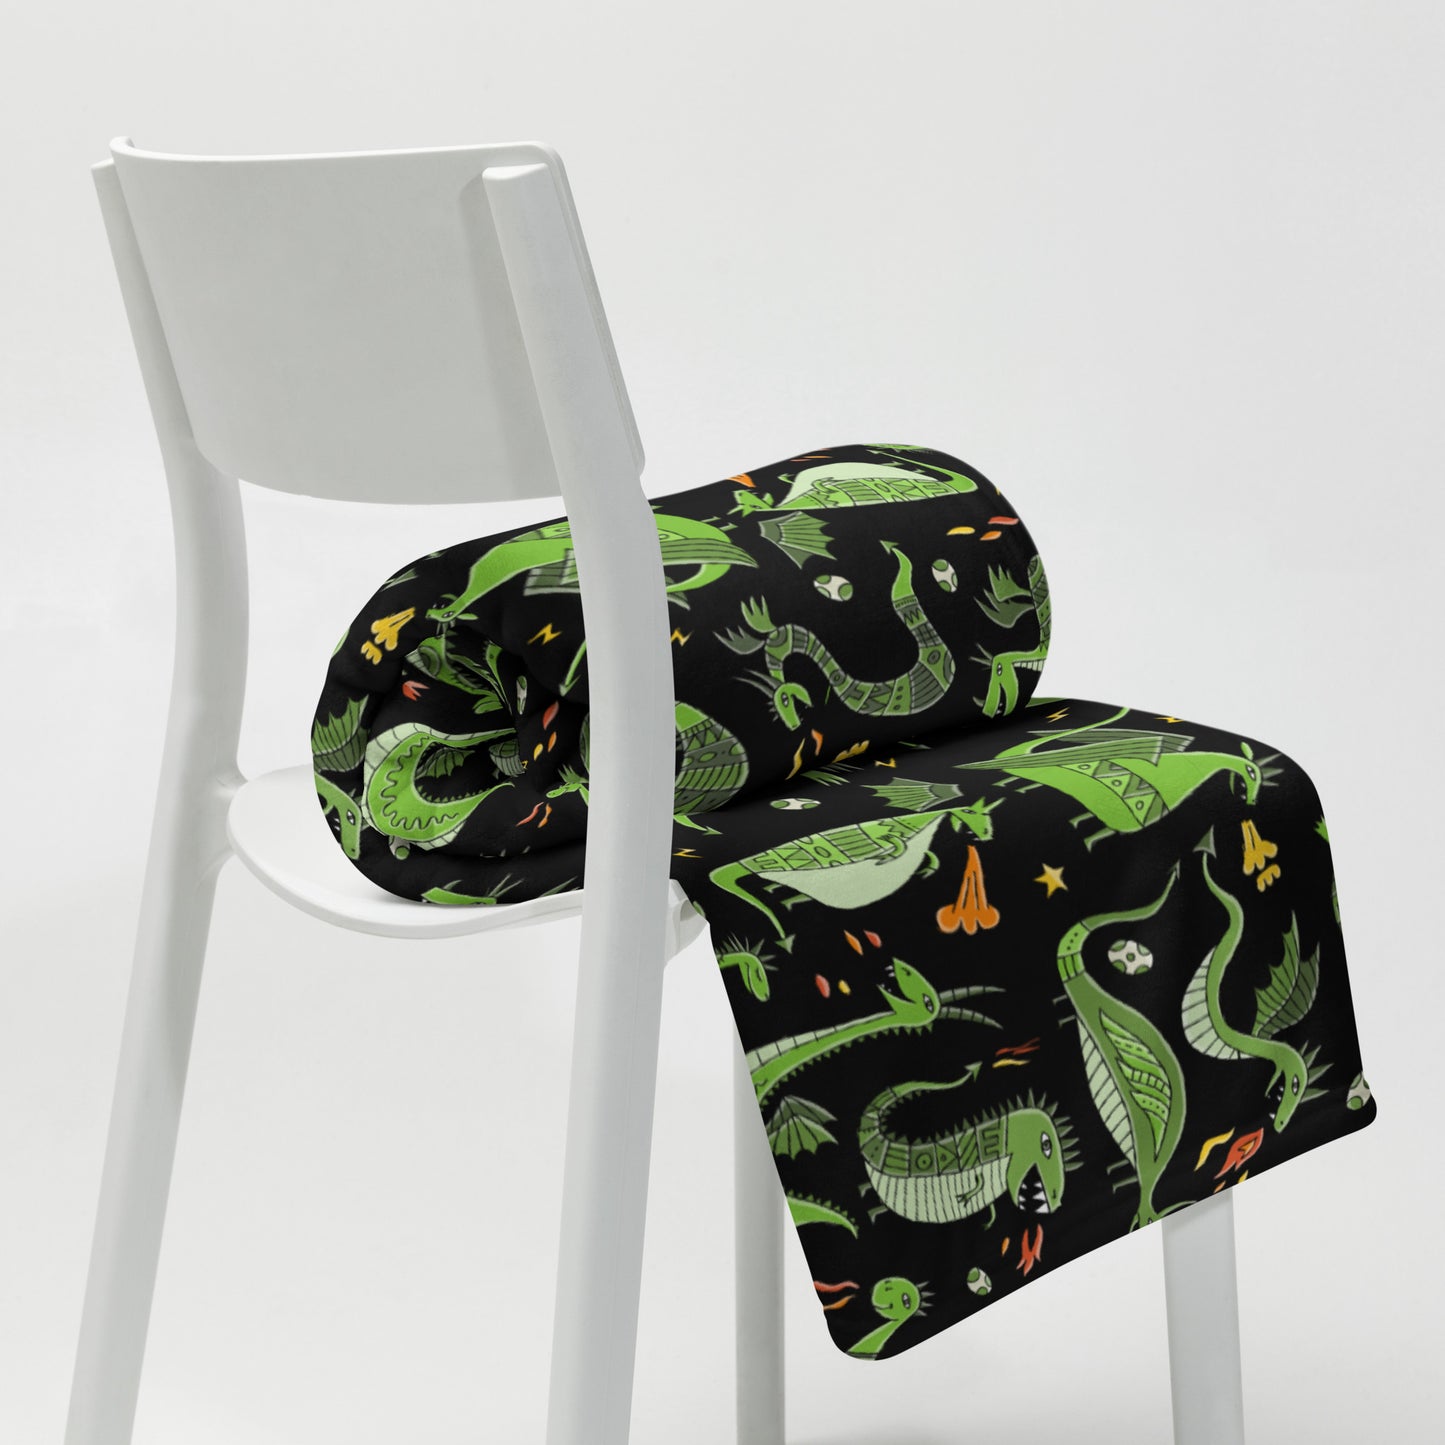 Black blanket 50x60 with funny green dragons on chair